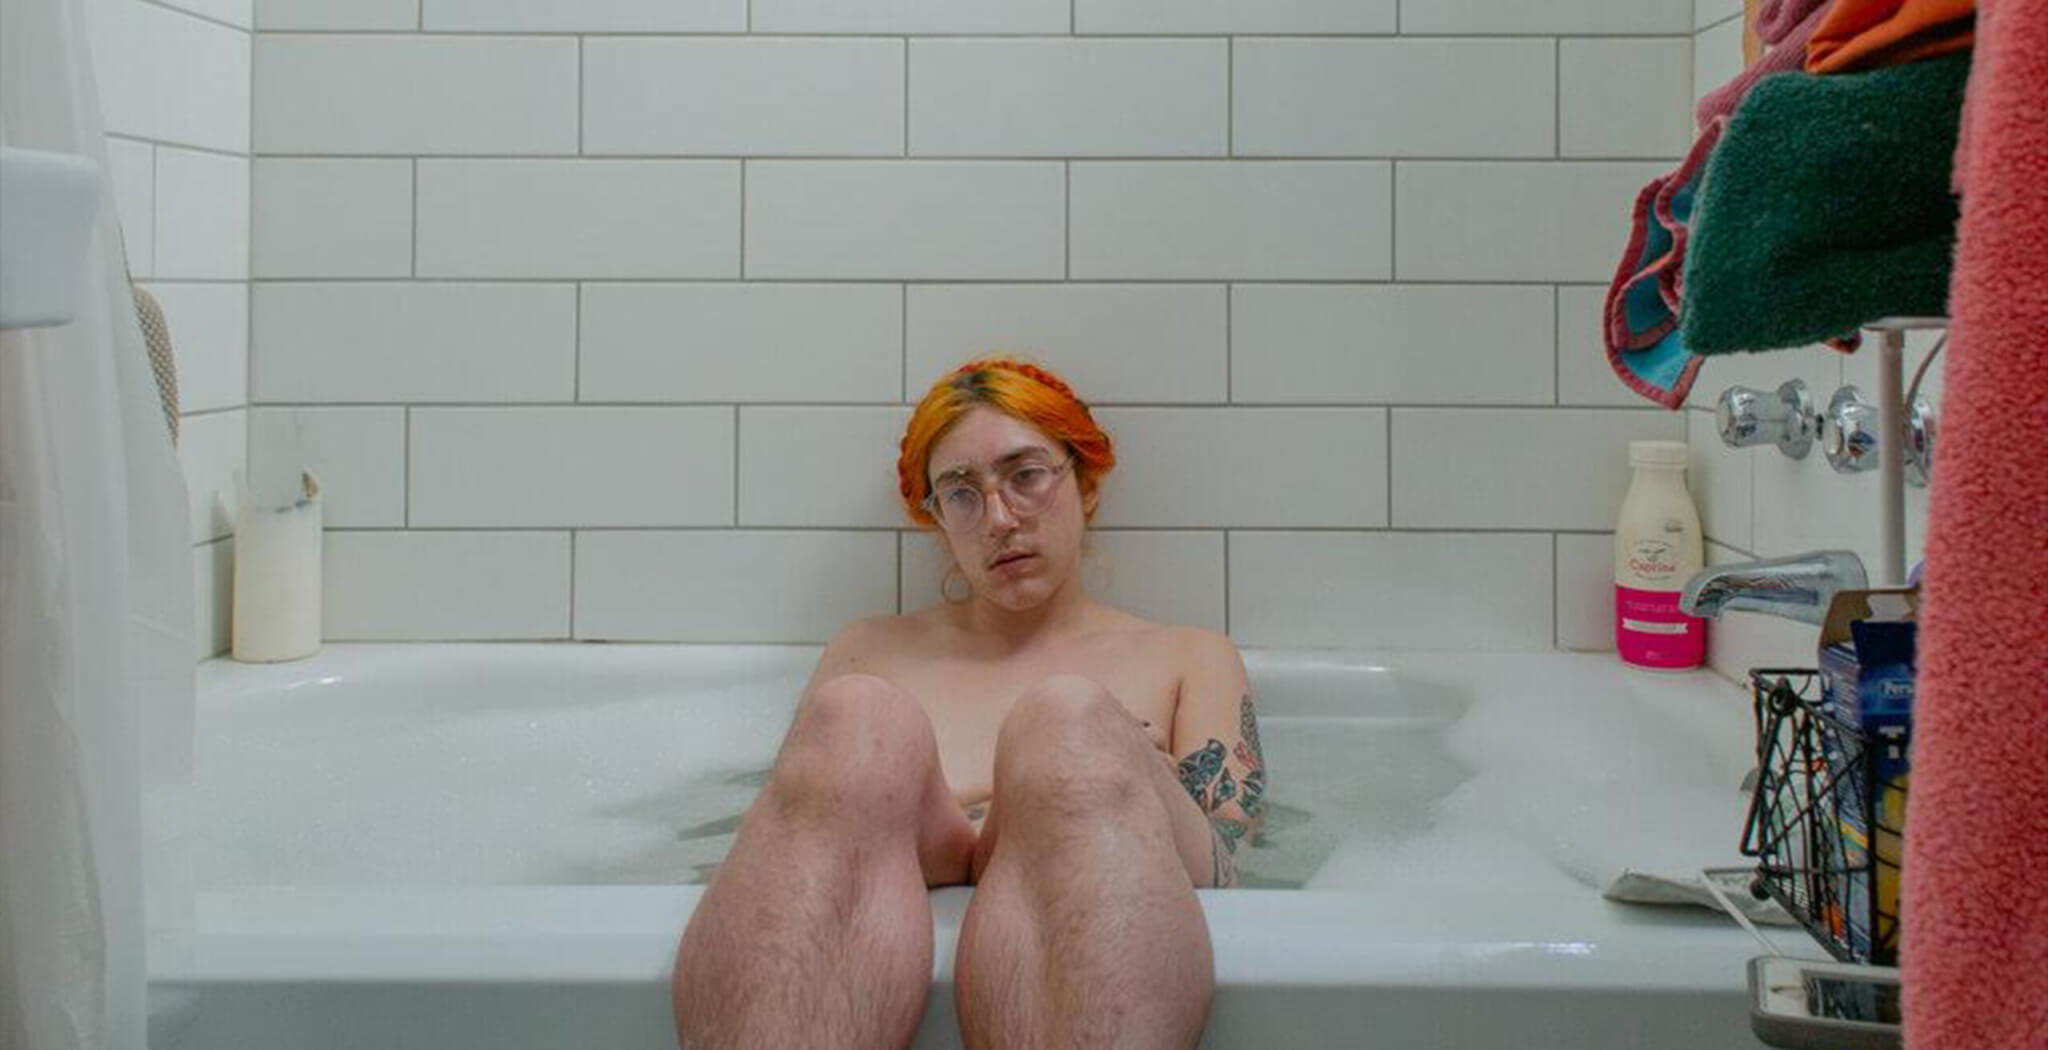 A person, Laurence Philomène, is sitting in a bathtub. They have bright red hair